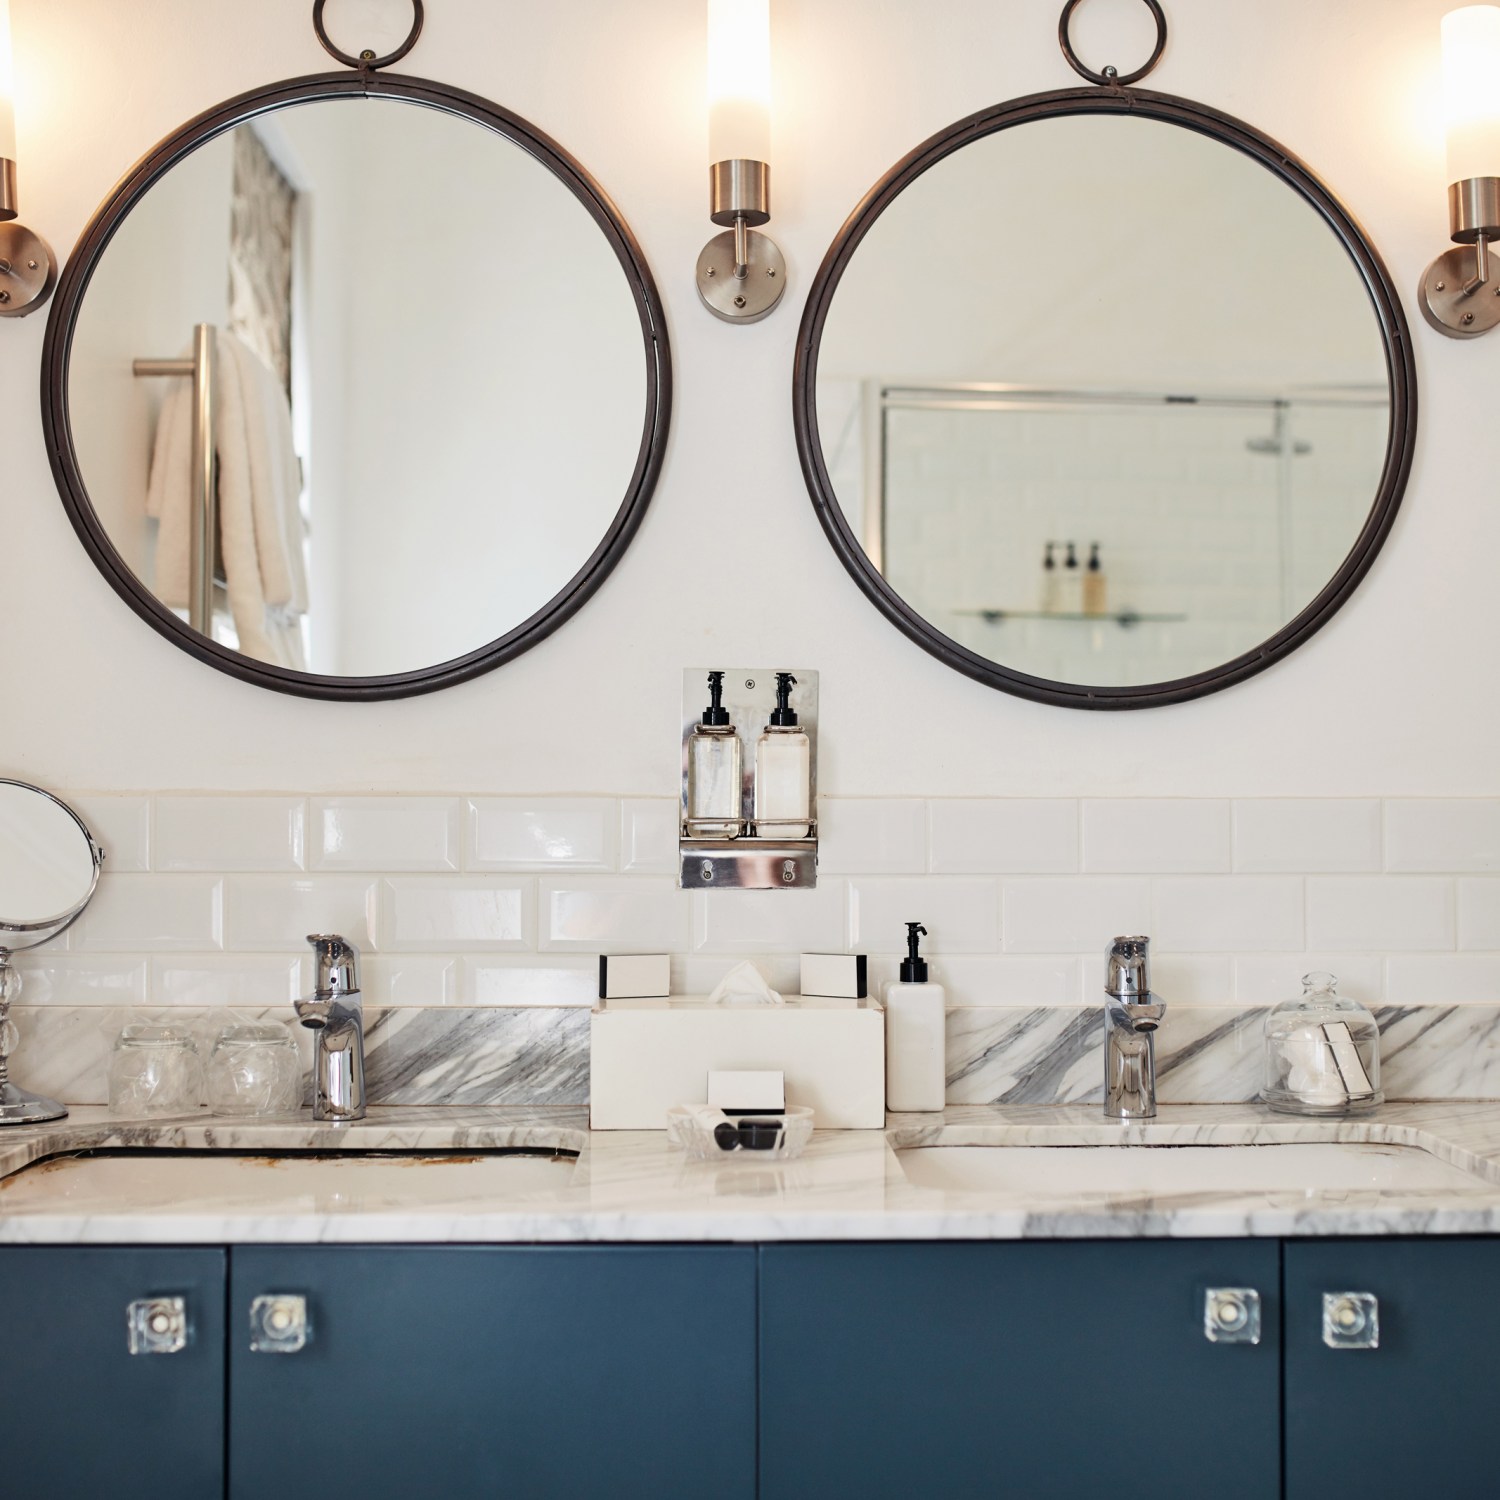 A bathroom with two mirrors and two sinks shows what a bathroom remodel could look like.